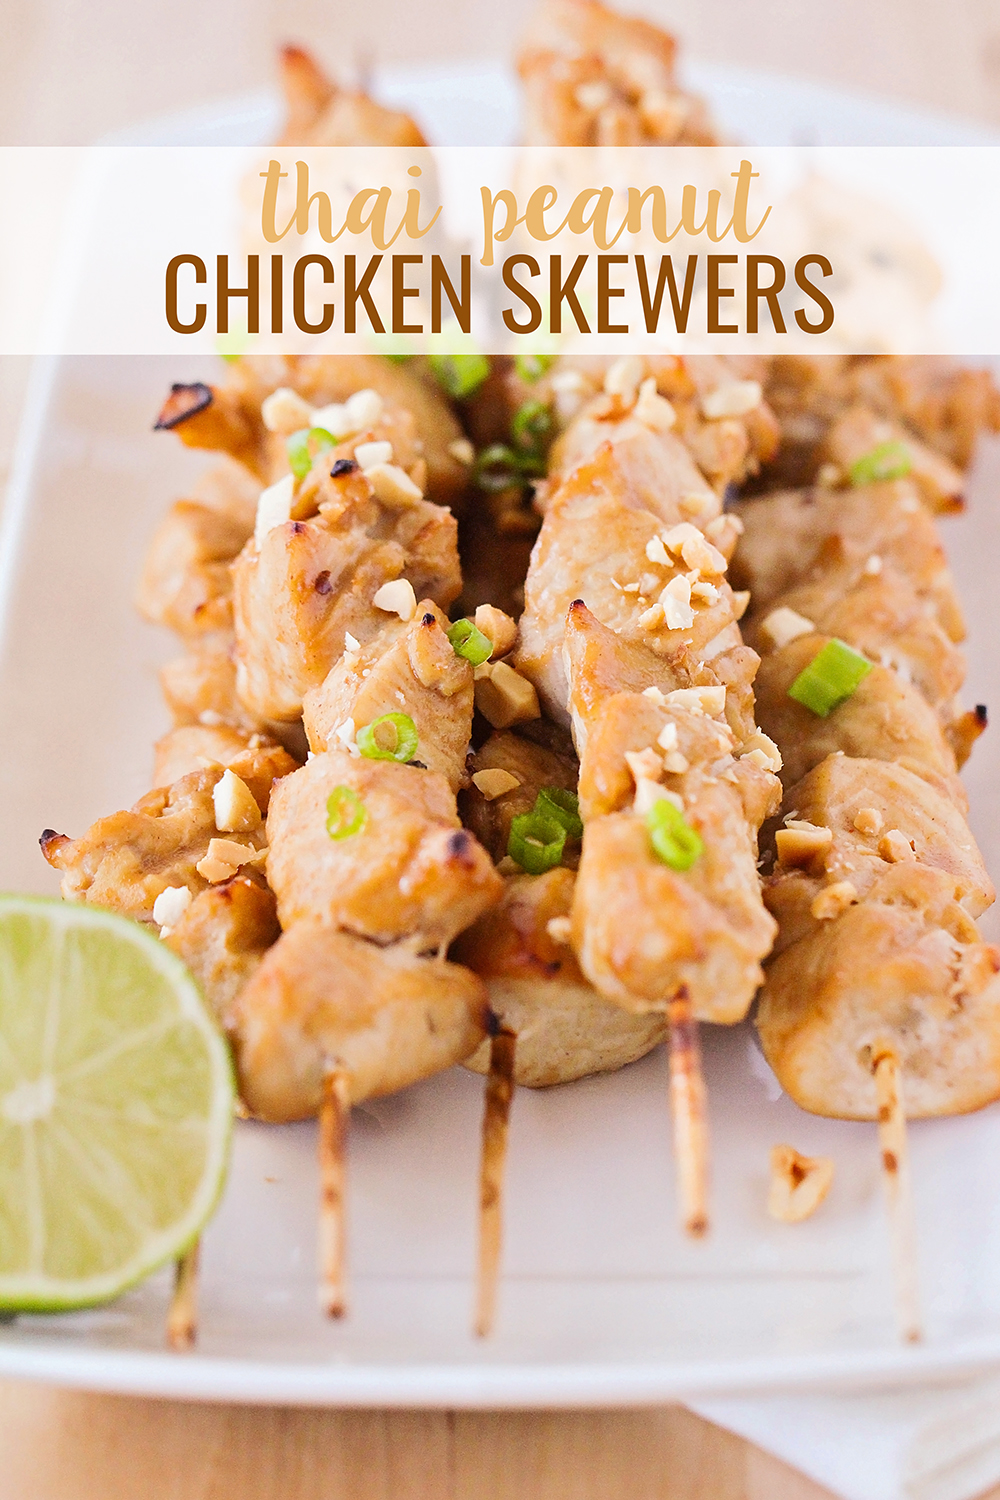 These thai peanut chicken skewers are so delicious and flavorful! They are a quick and easy weeknight dinner that everyone will love!